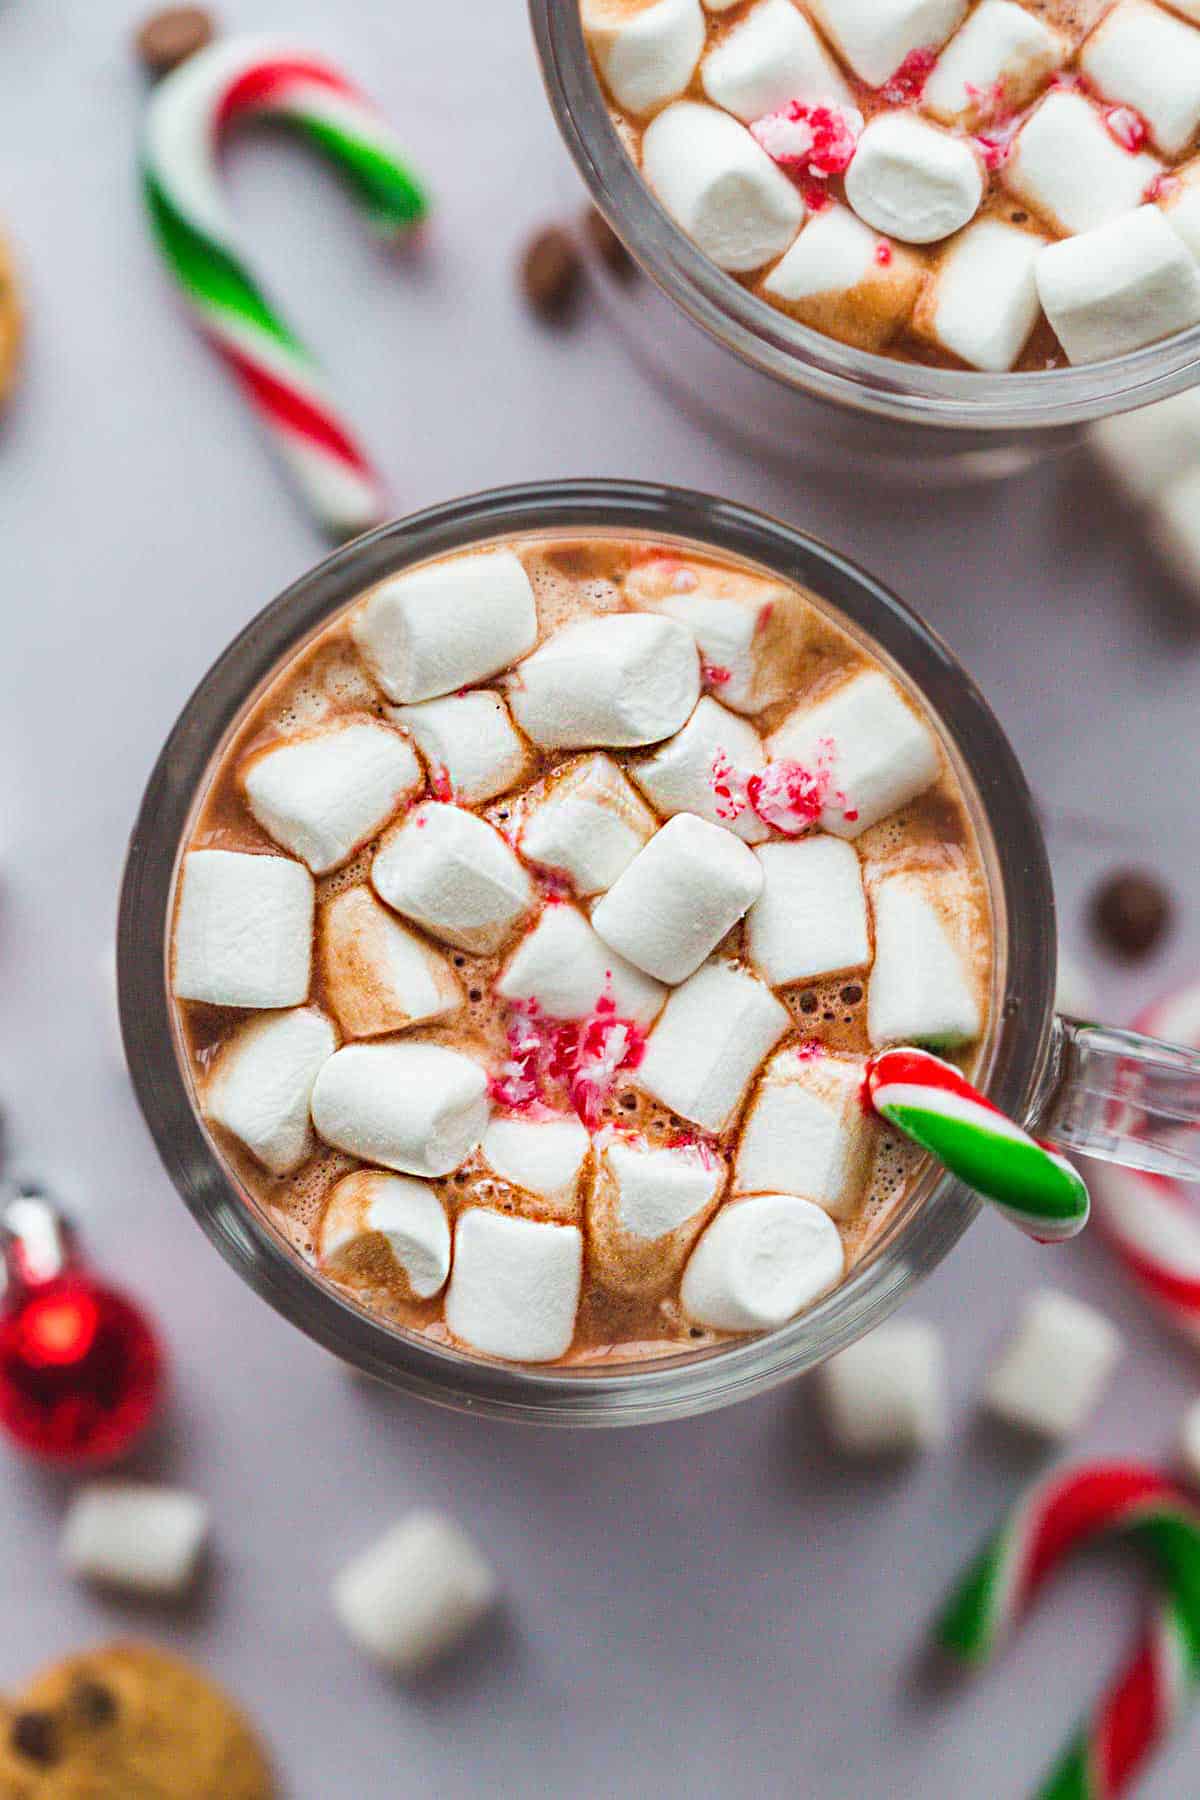 A top view of the hot chocolate with melted marshmallows